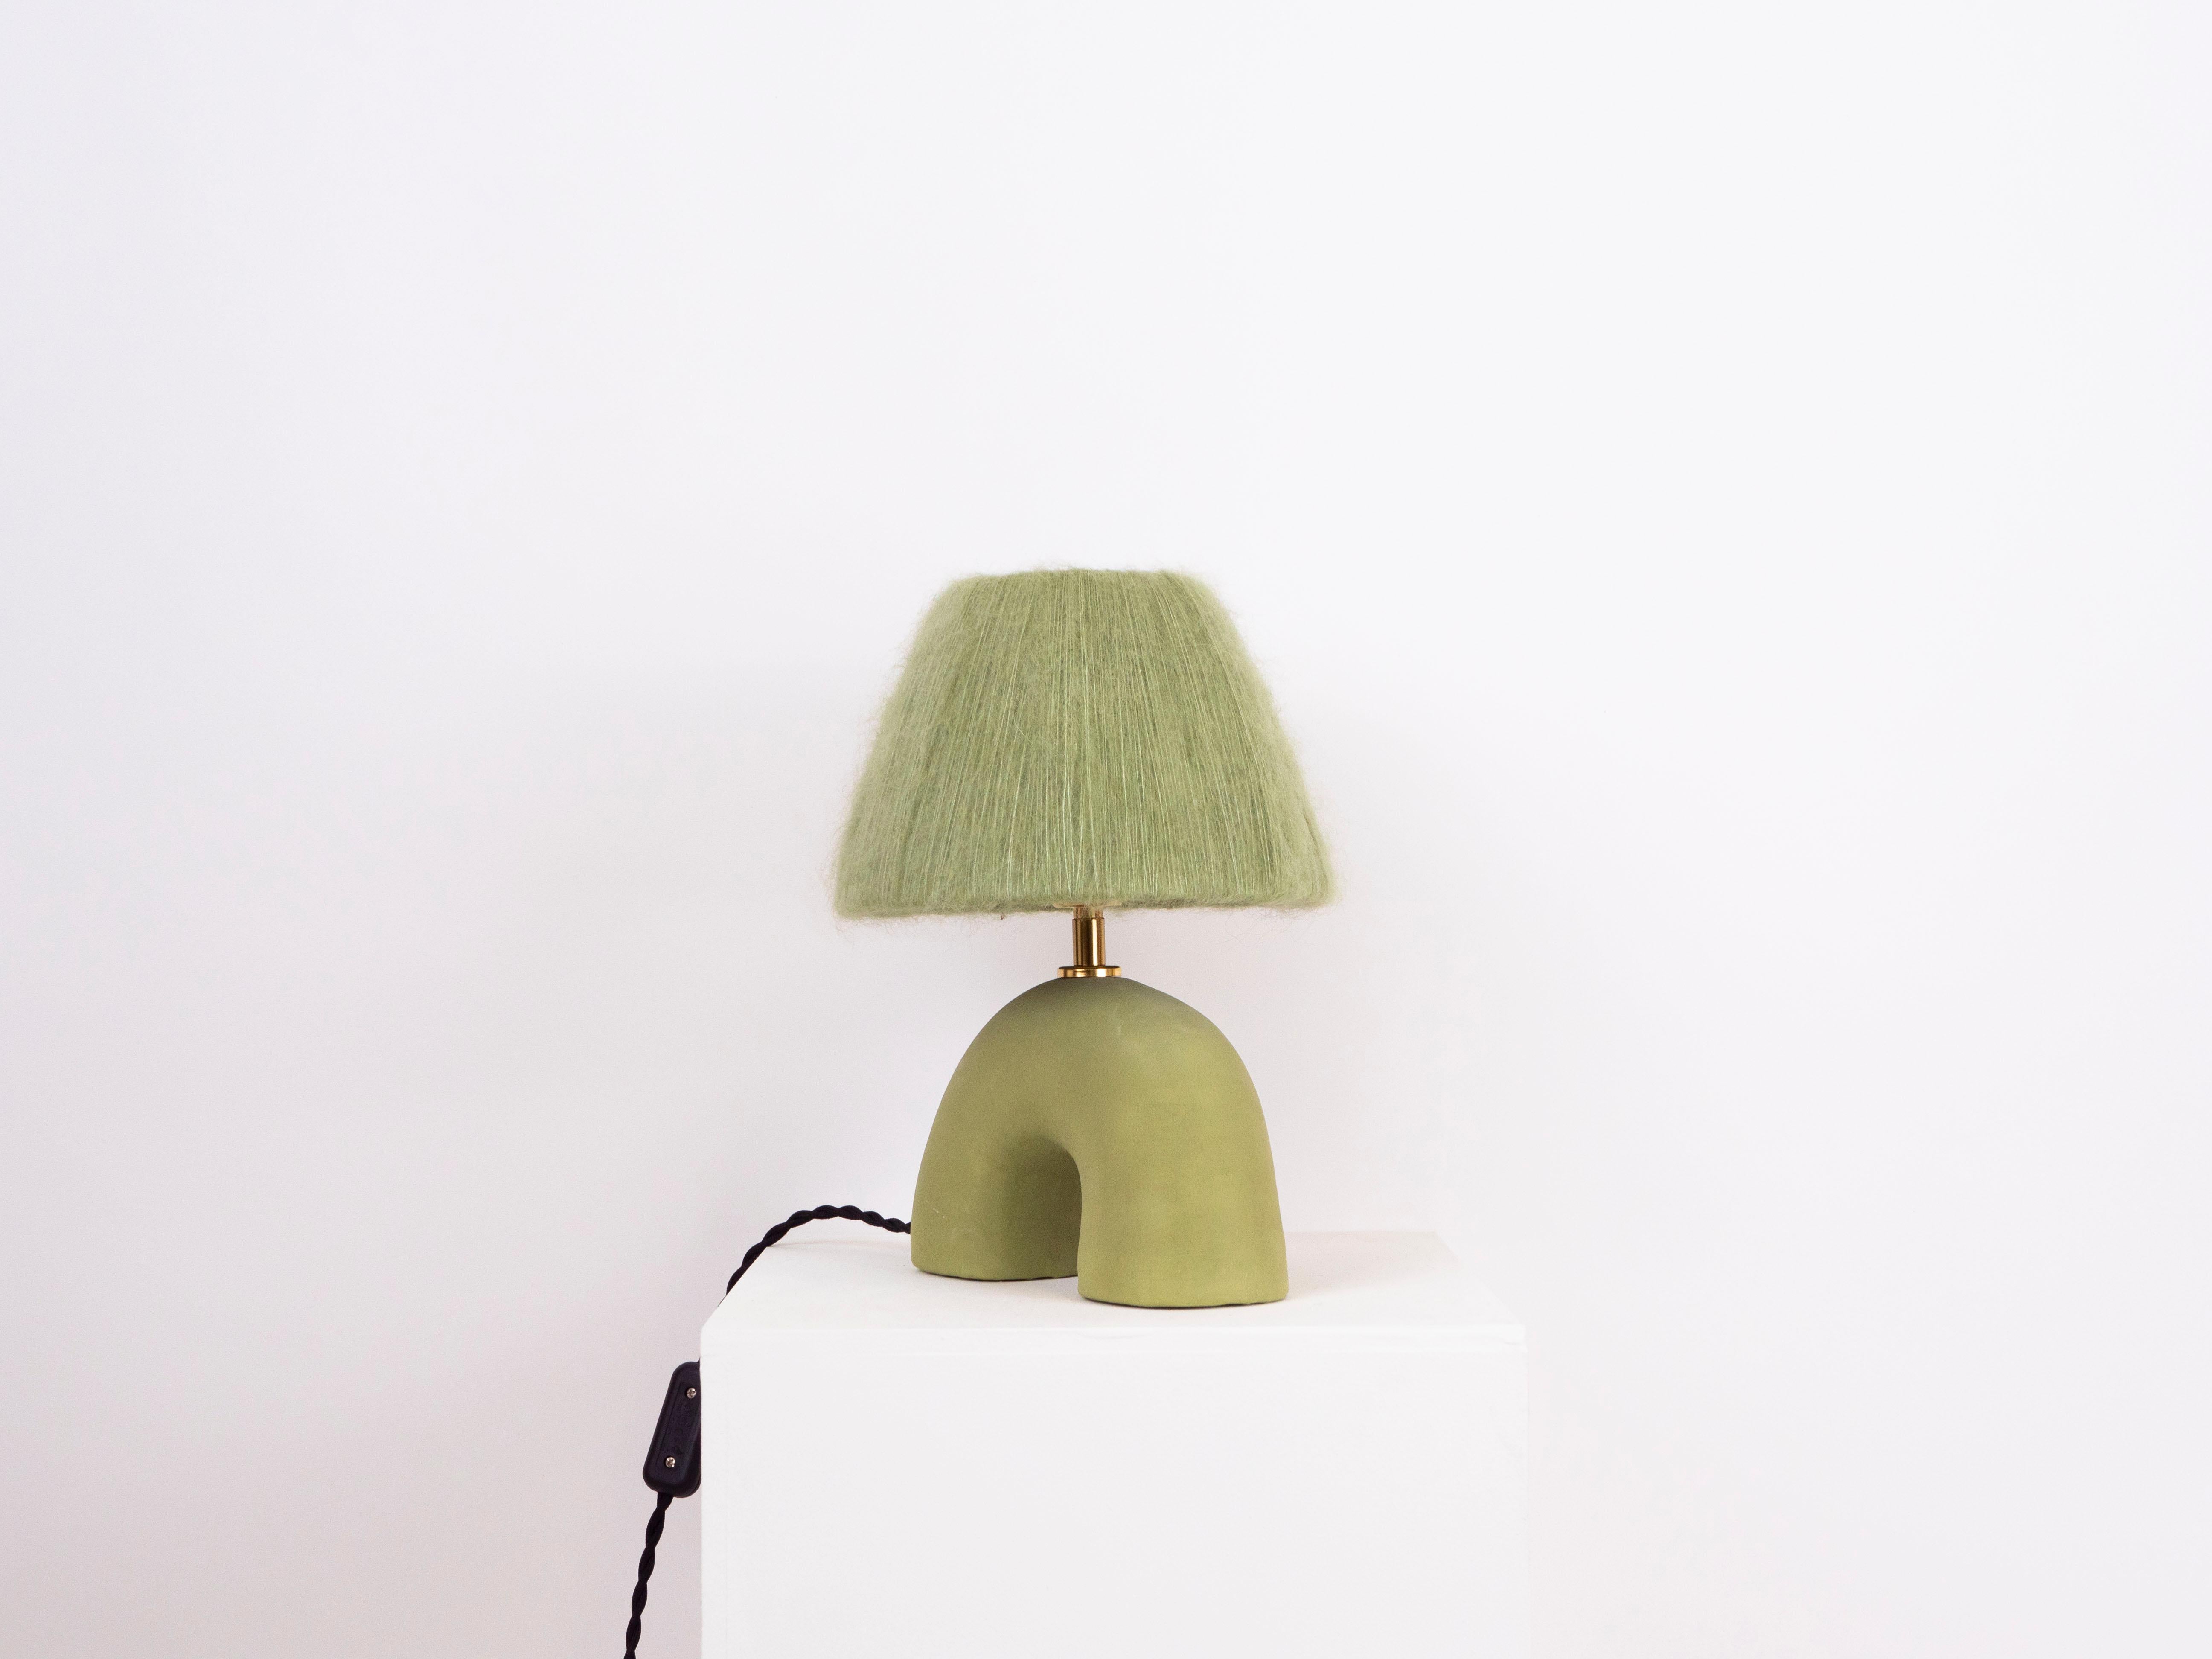 Green matte finish lamp with mohair shade

Estimated processing time is 2 weeks from order confirmation

Pictured with a Mini Globe LED E27 Bulb. Bulb not included

To pair this base with a shade in an alternative colour or Material, click the